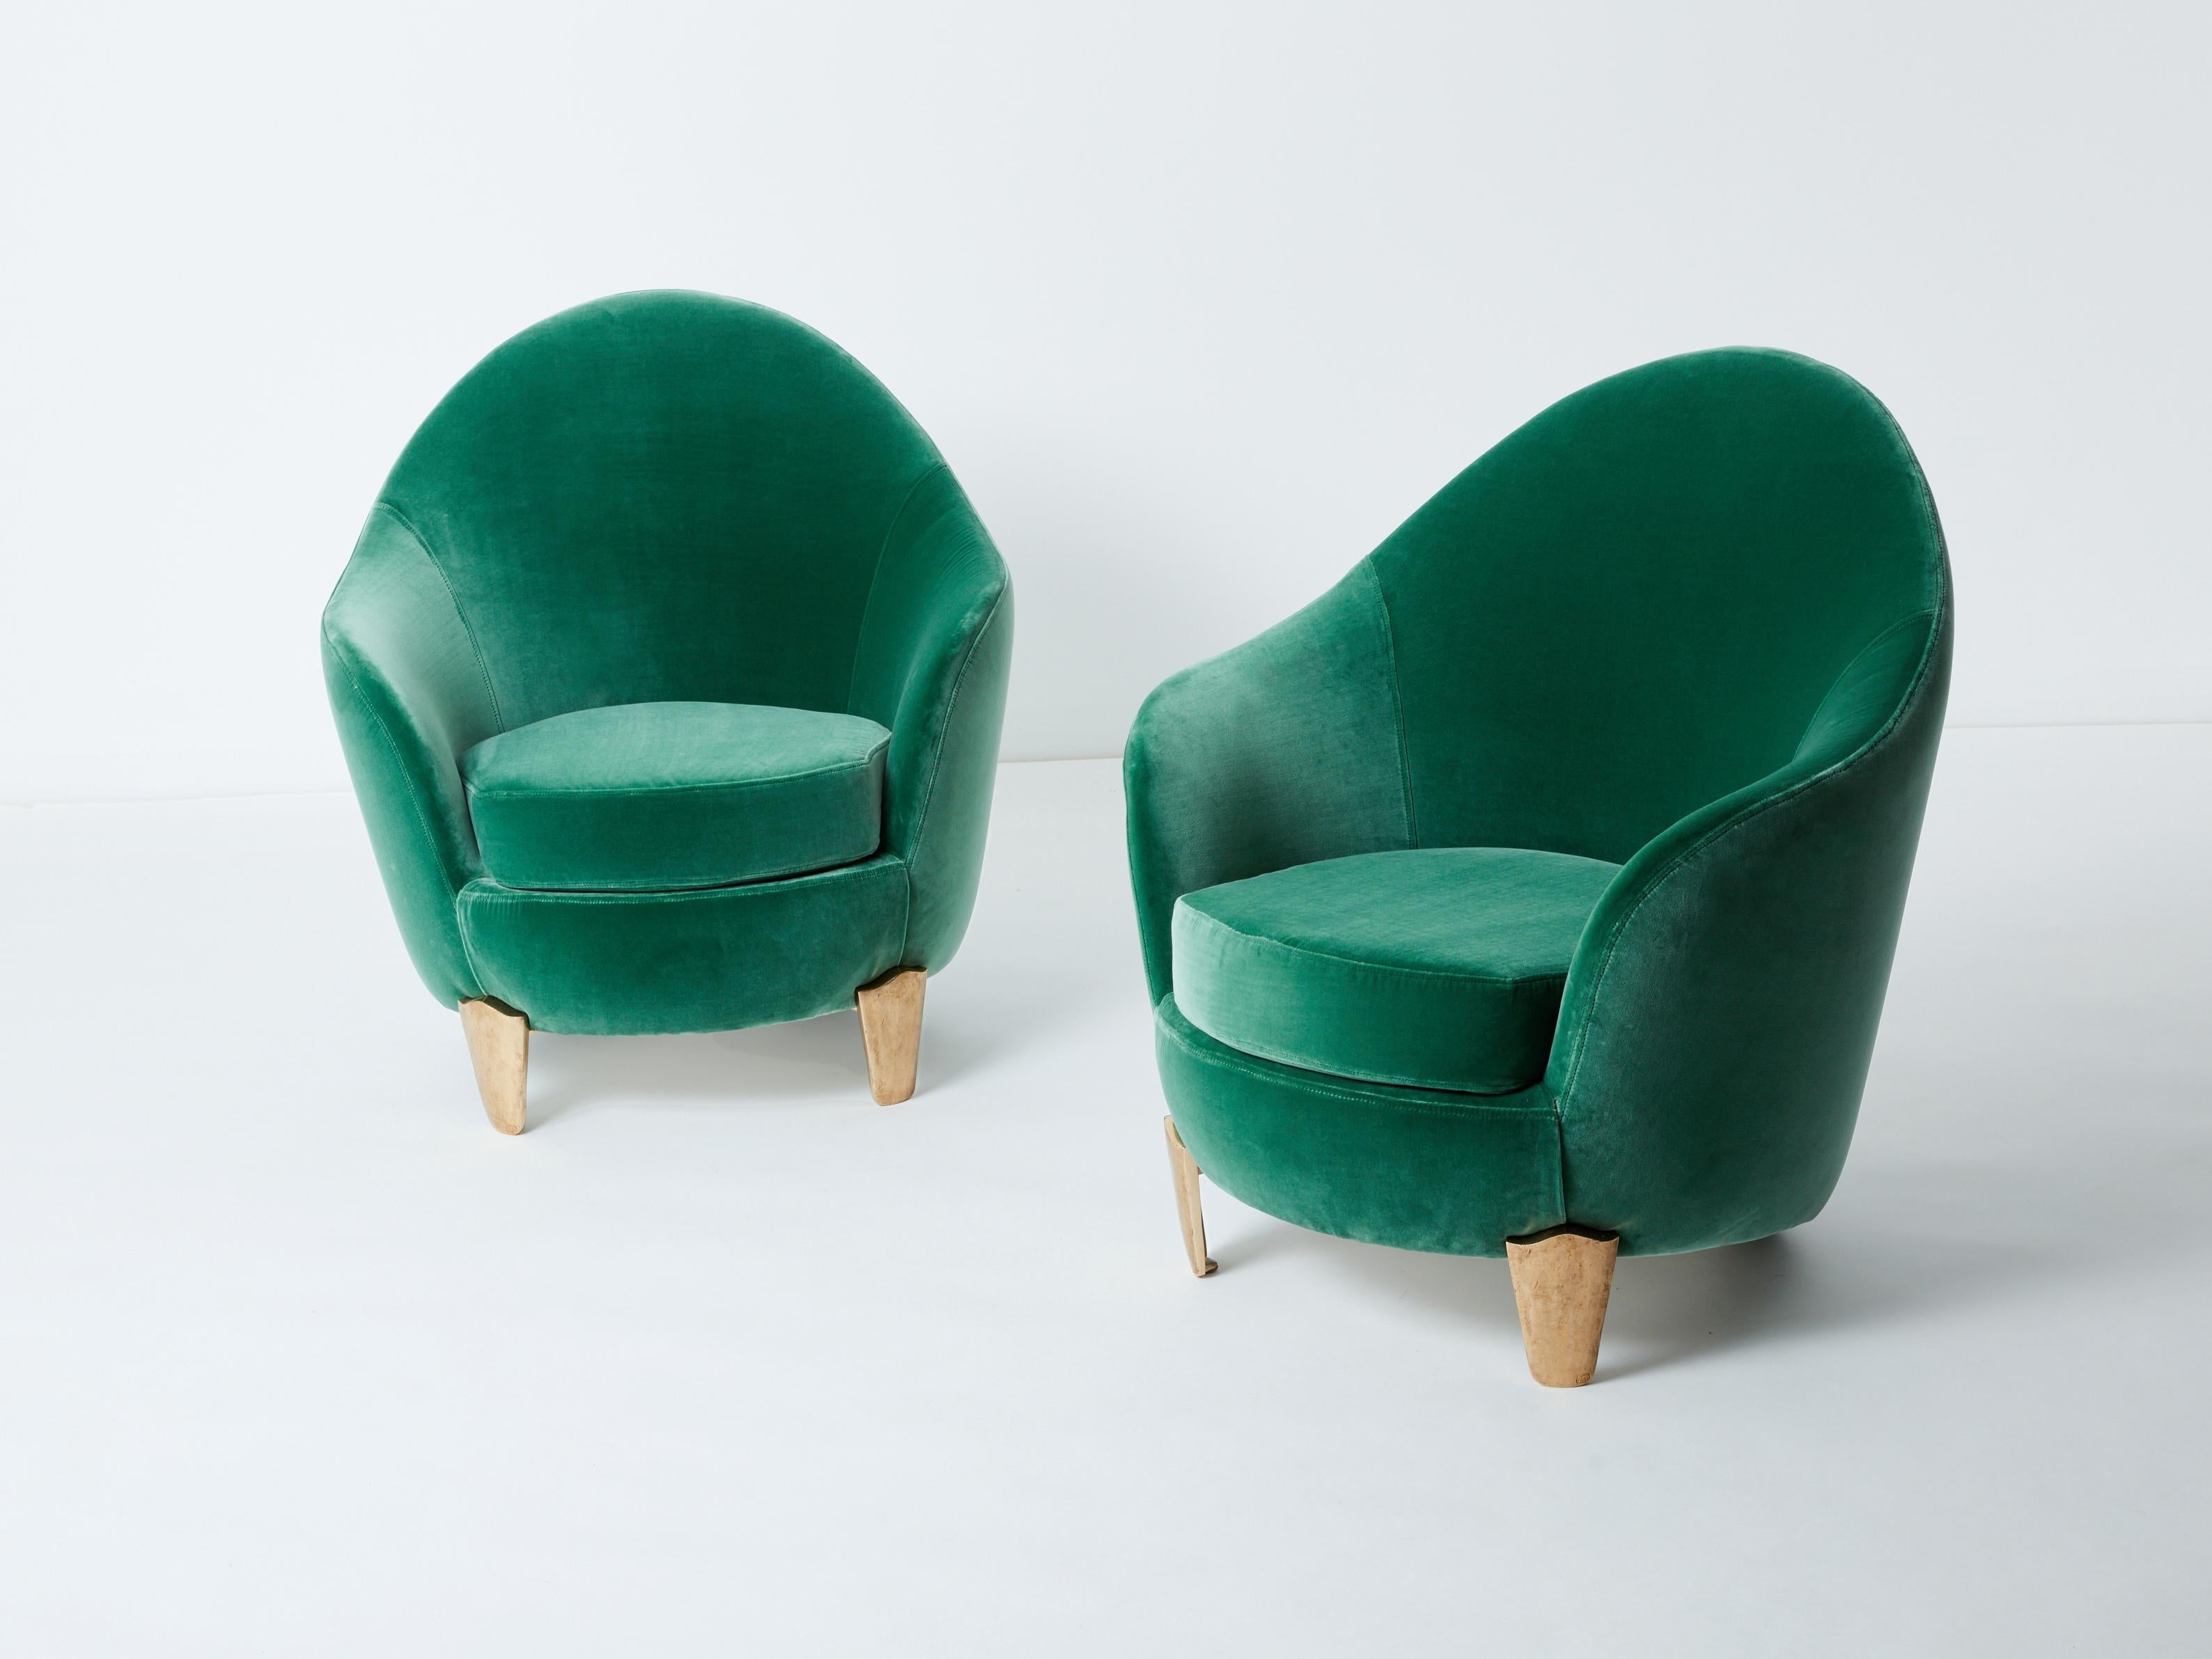 This is a beautiful pair of armchairs by Elizabeth Garouste & Mattia Bonetti, model Koala, with solid bronze feet, fully restored and reupholstered. Garouste & Bonetti began their collaboration and gained global recognition for their interior design